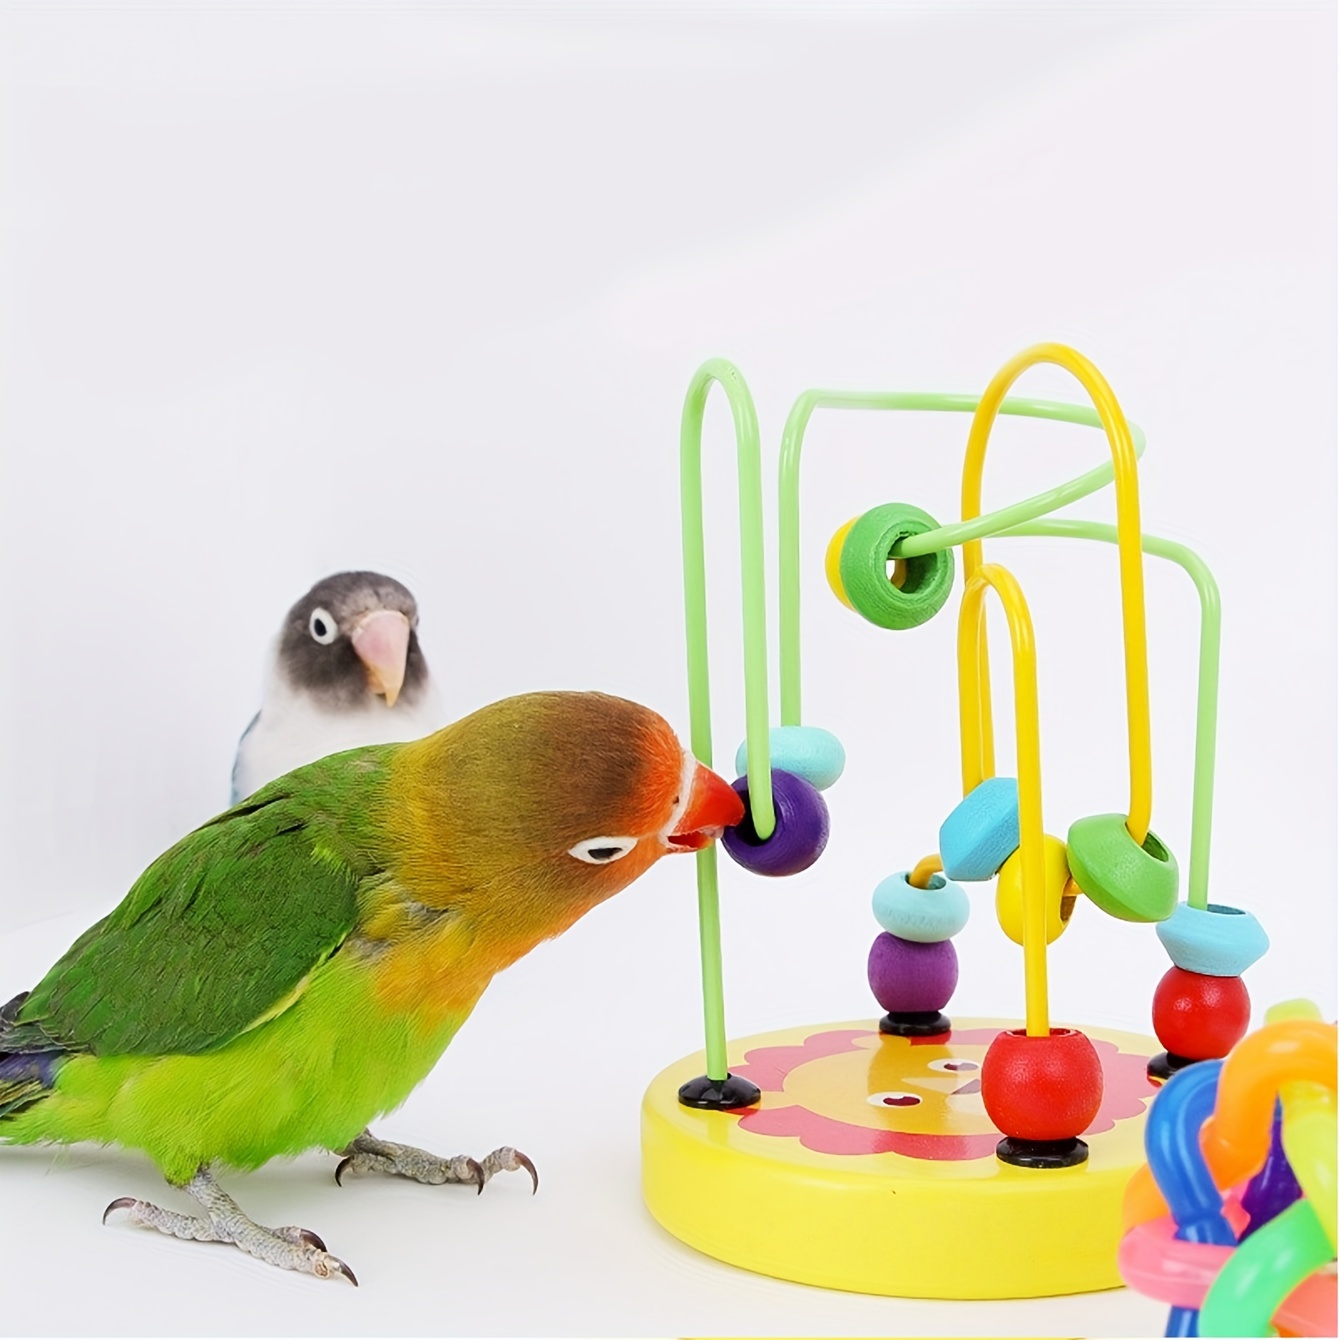 

1pc Bird Toy, Educational Puzzle Toy, Colorful Bead Wire Maze Coaster Parrot Gnawing Toy